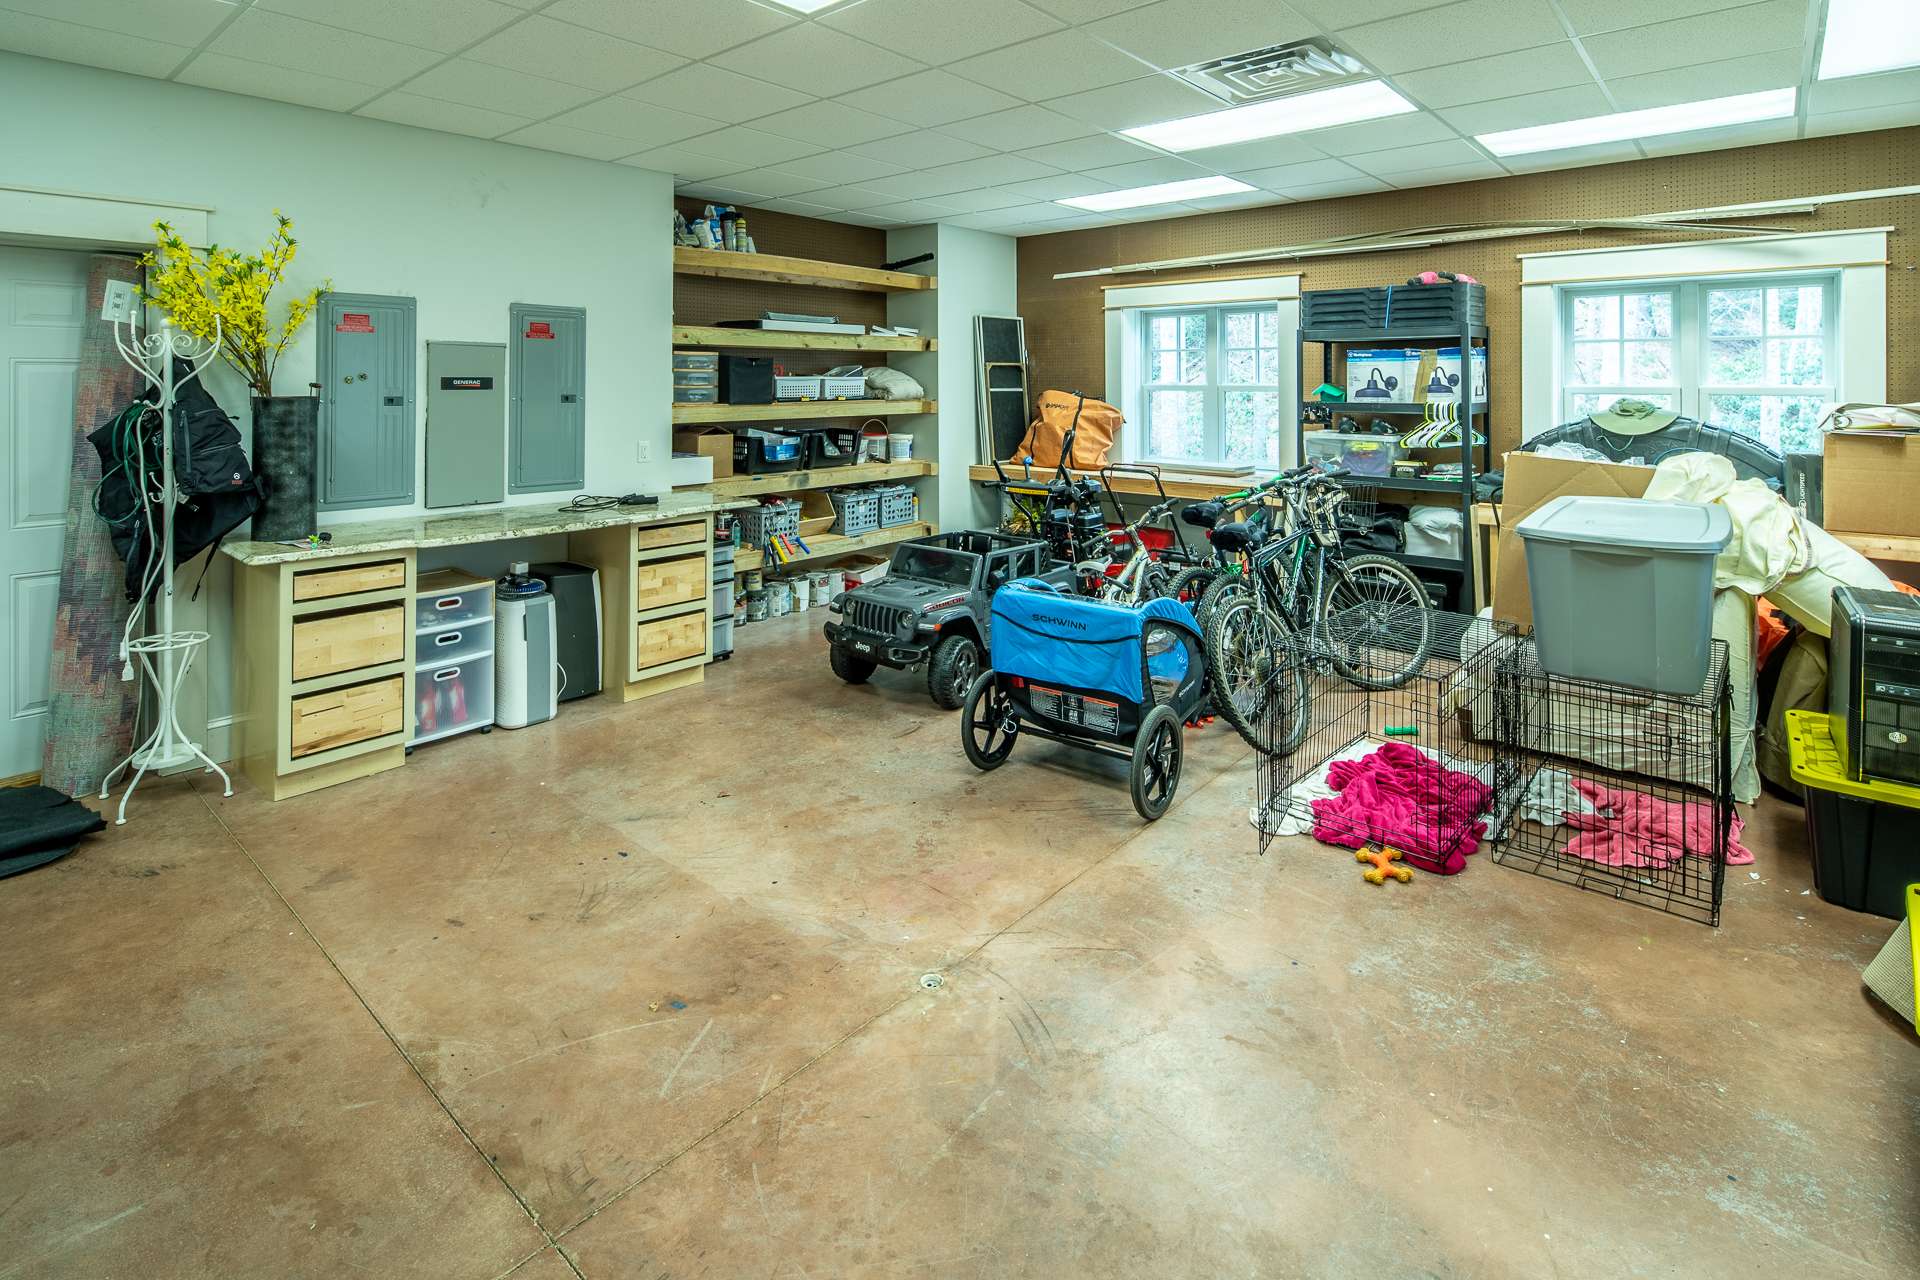 You will appreciate the attached garage for car storage, workshop, or other storage space.